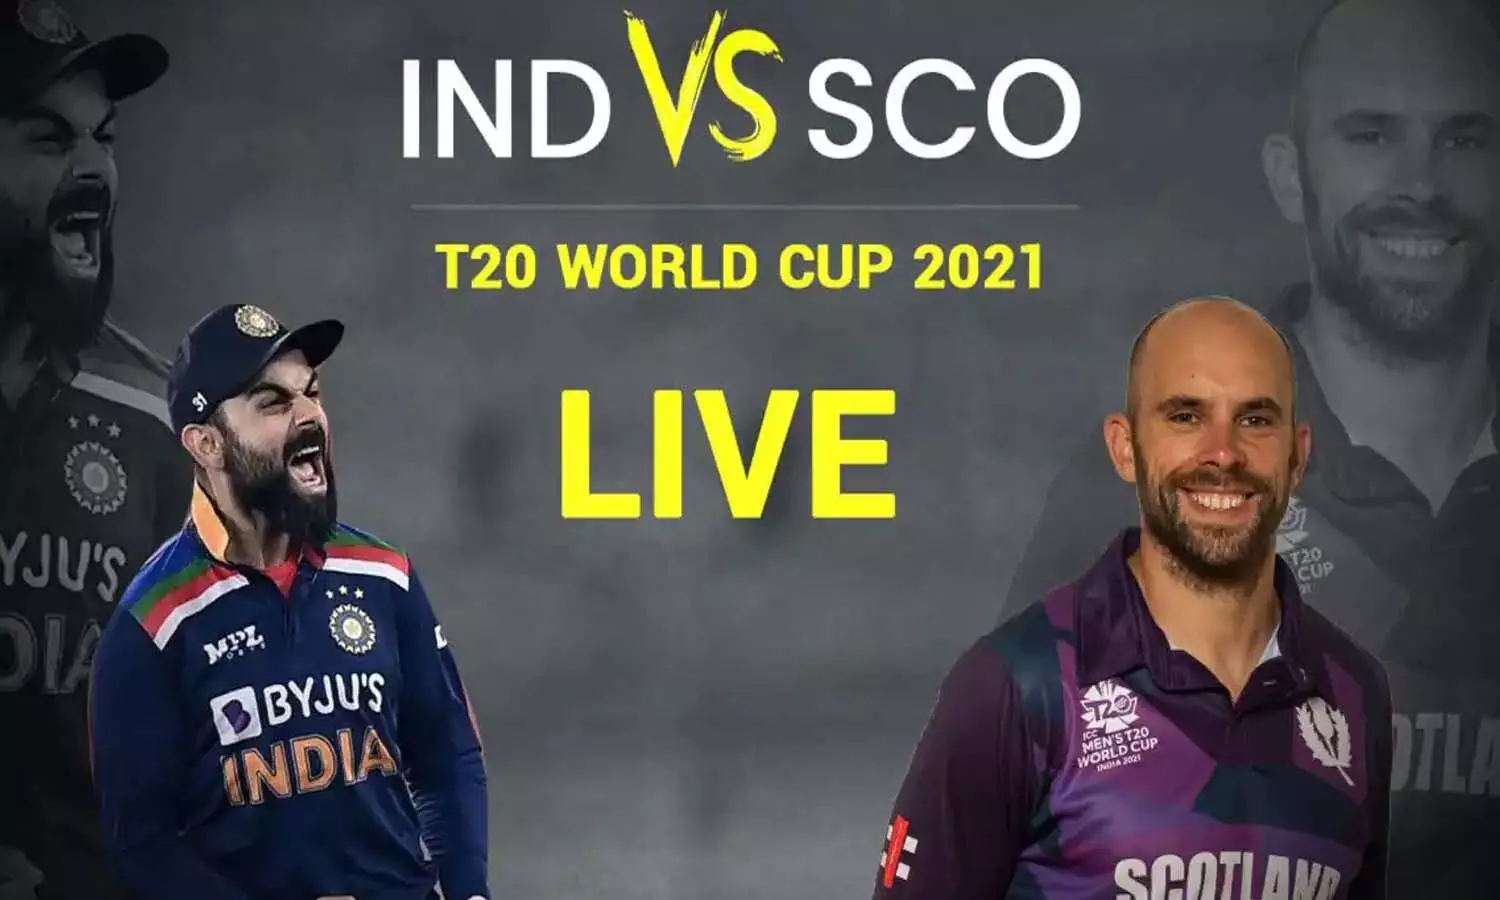 T20 World Cup: IND vs SCO Live: Team India won the toss, Virat Kohli decided to bowl first